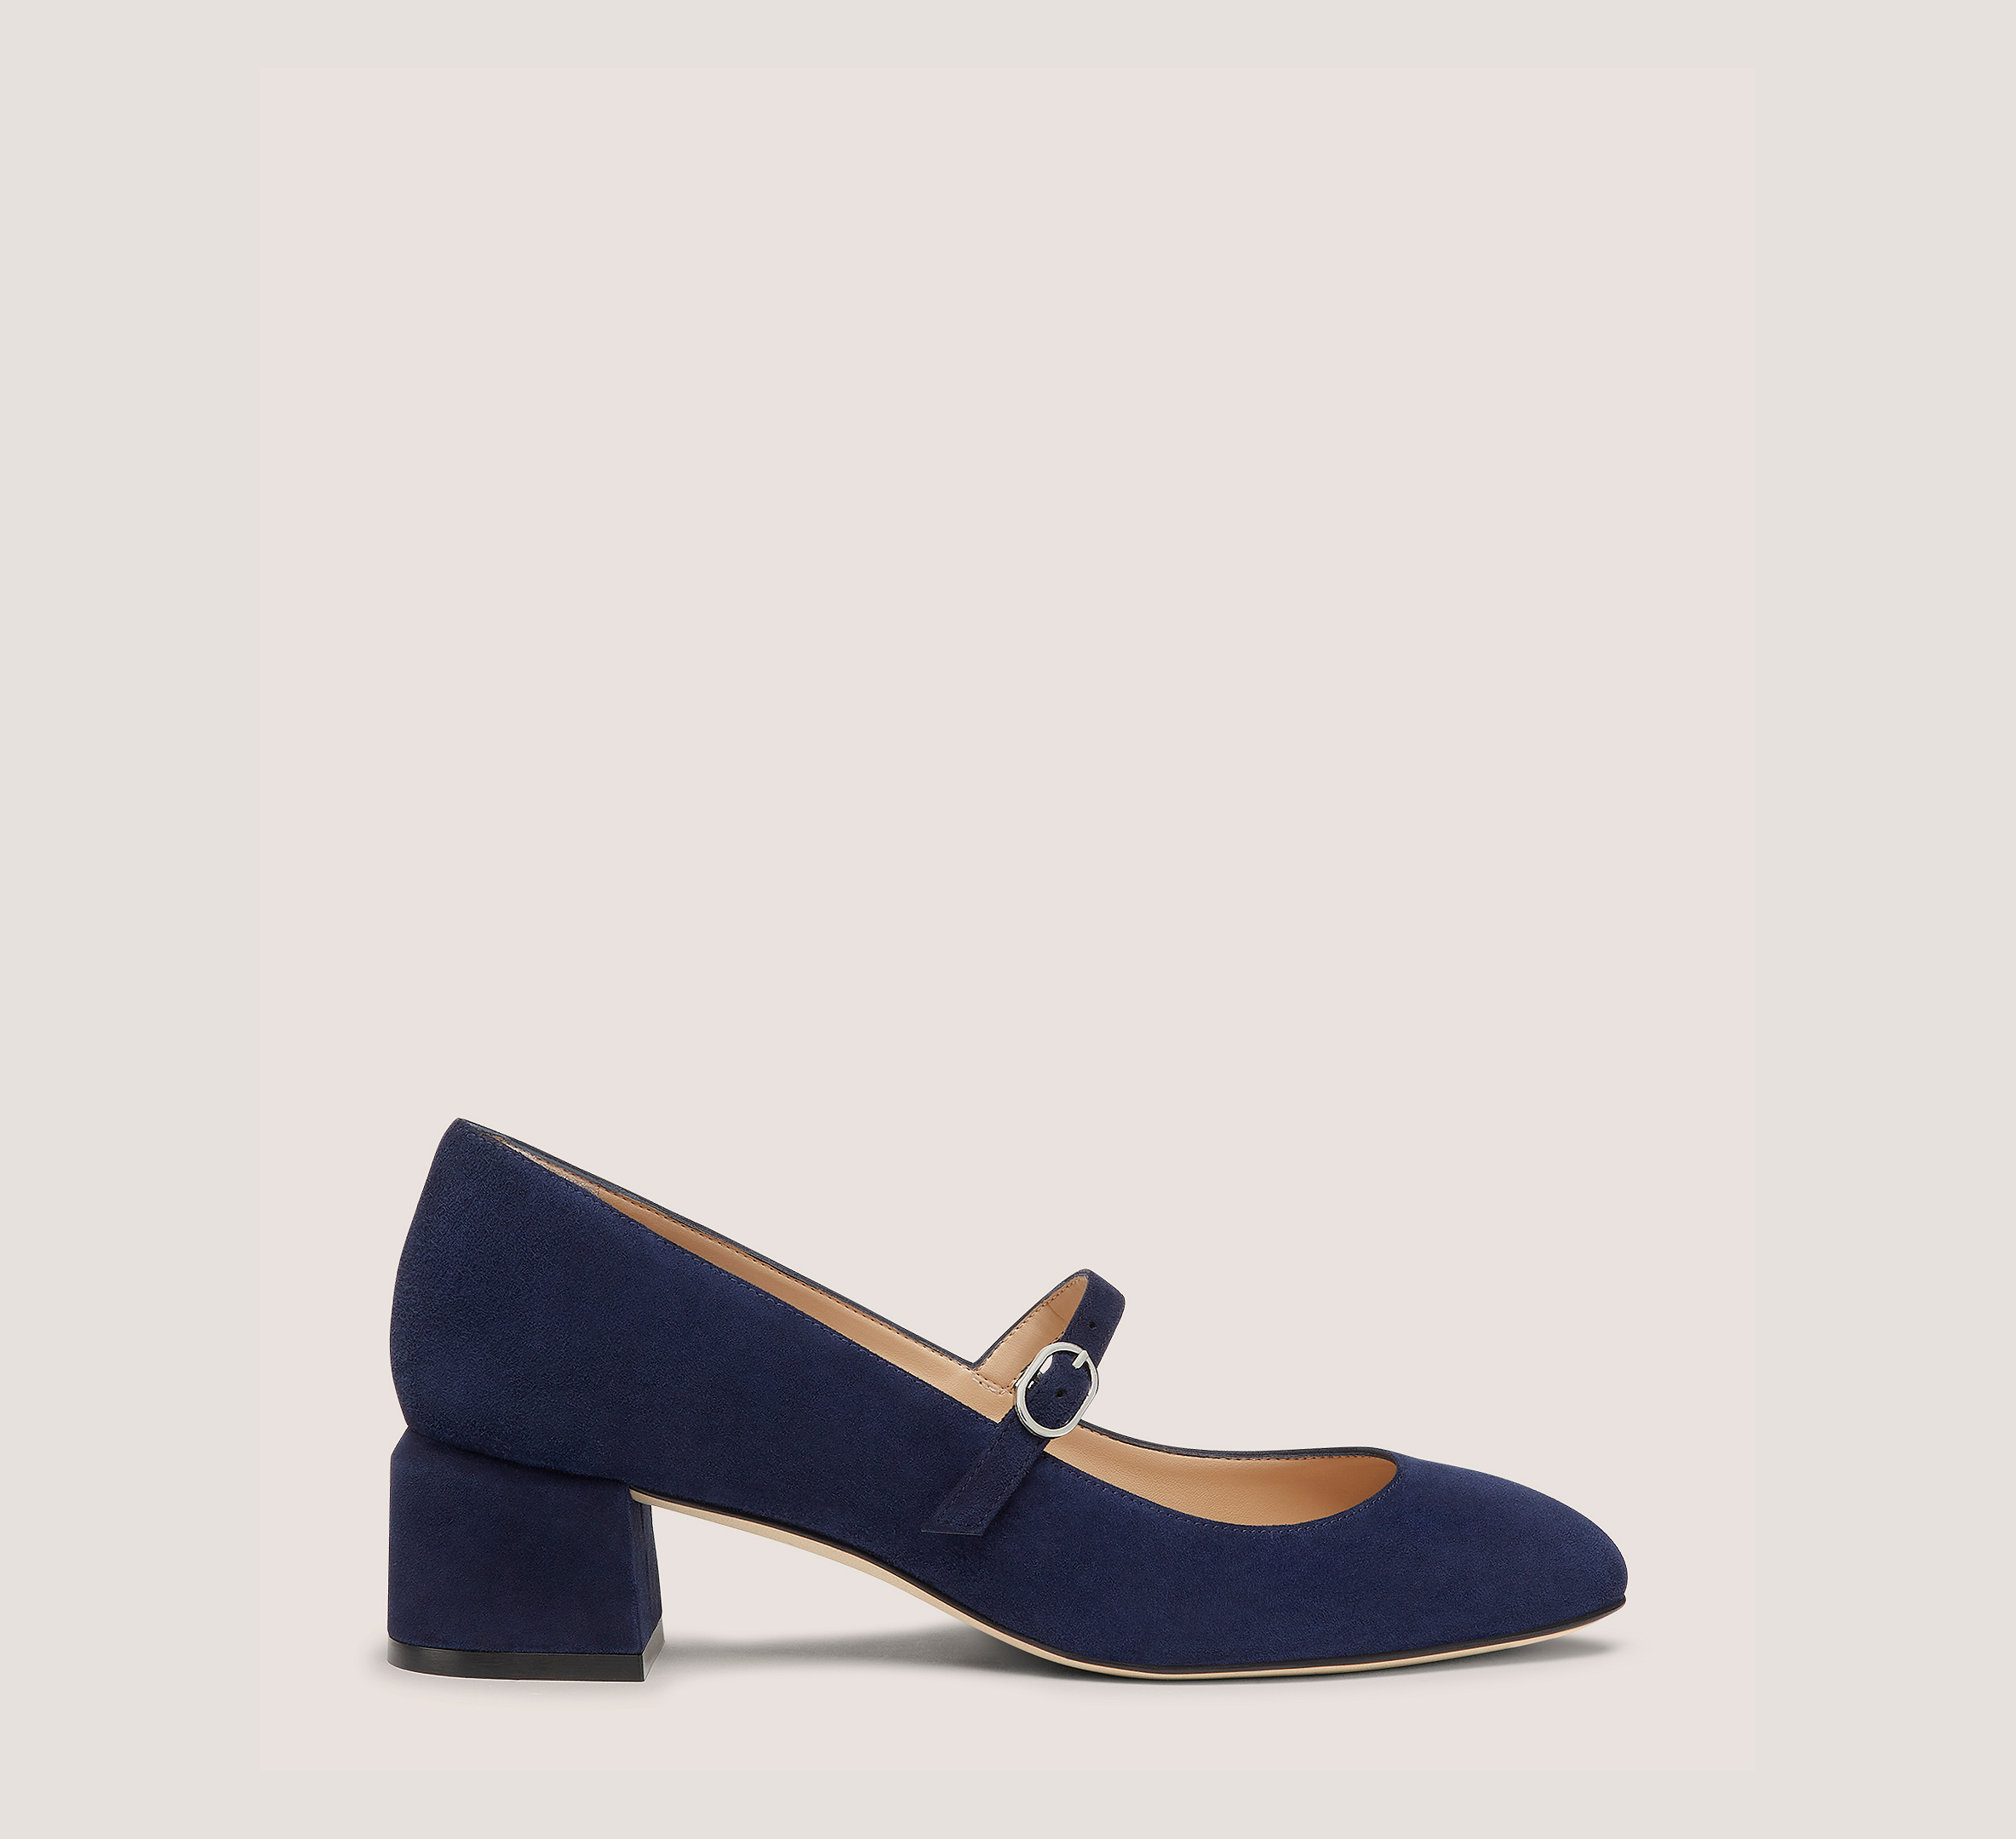 Stuart Weitzman Gabby 45 Mary Jane The Sw Outlet In Navy Blue